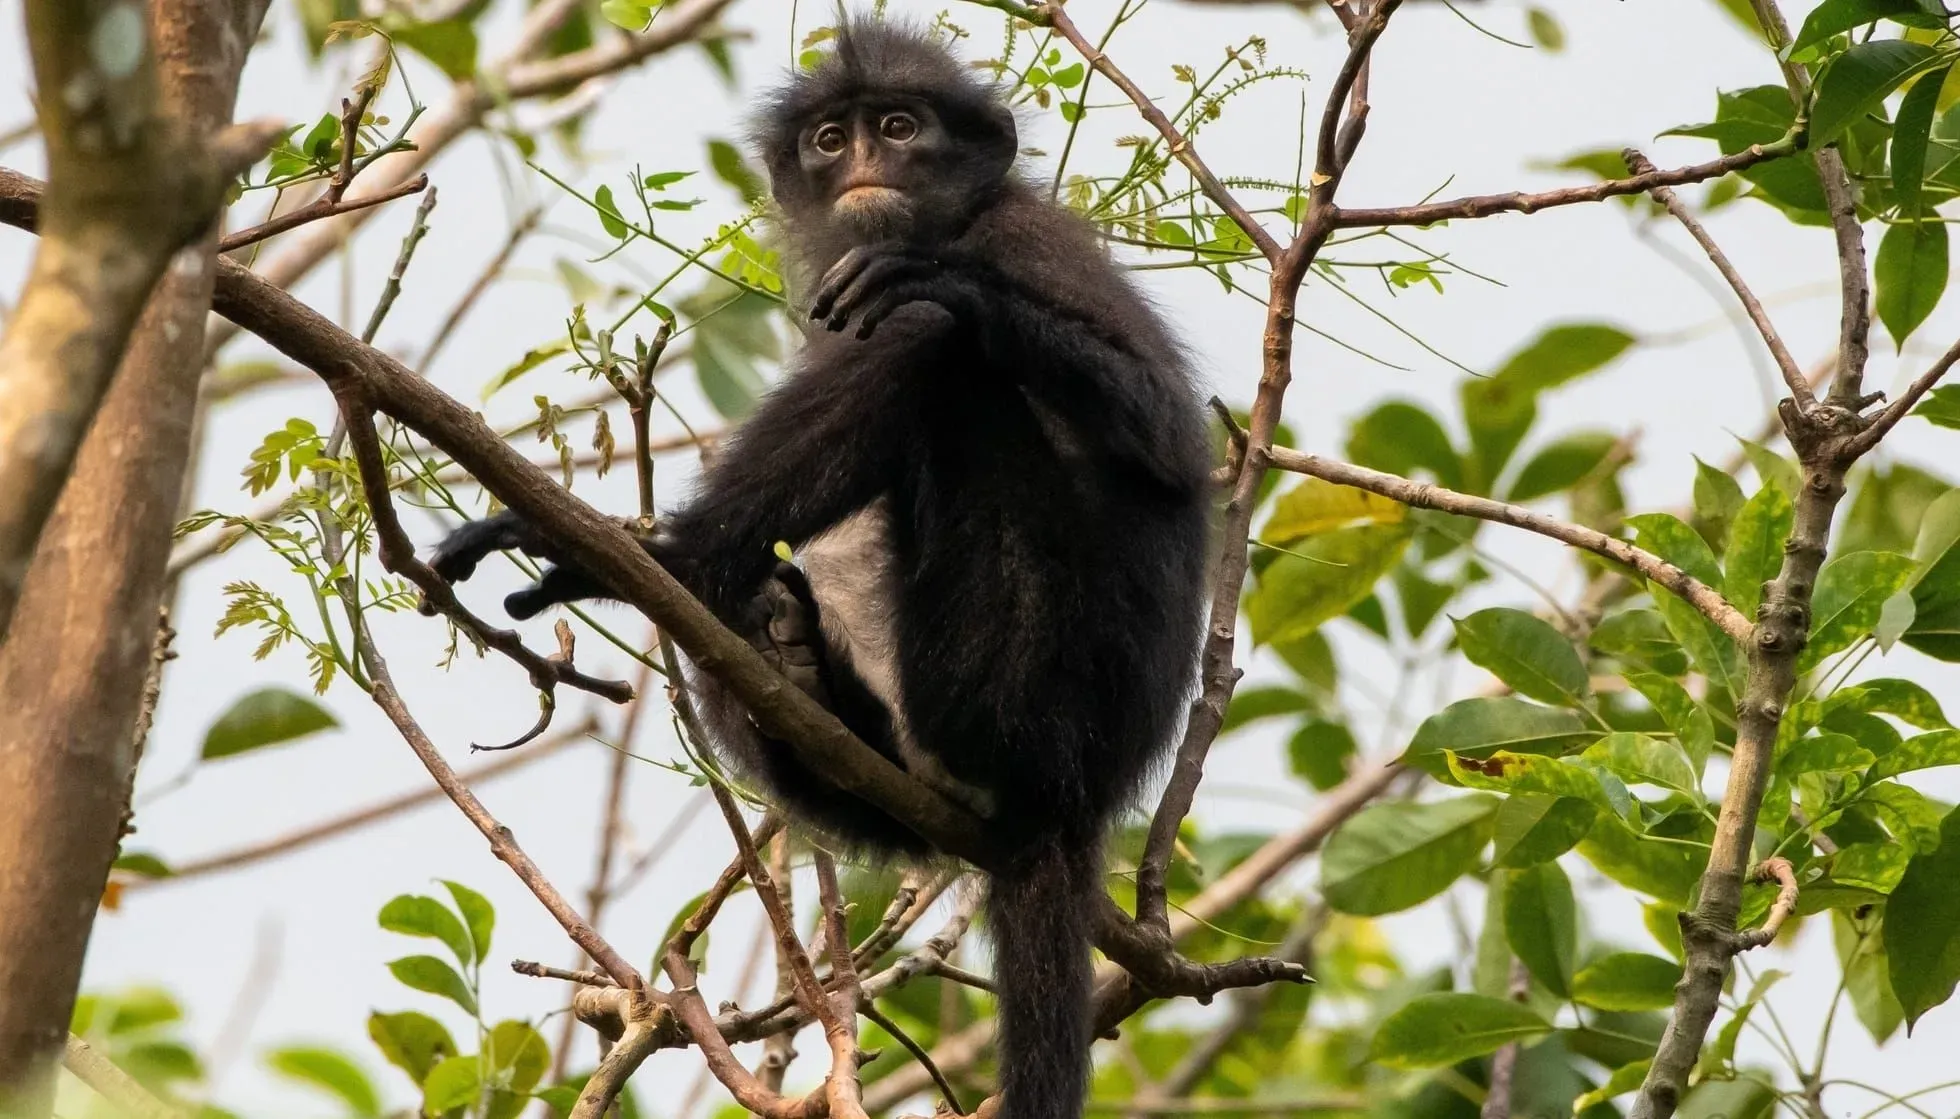 Yellow-Tailed Woolly Monkey sitting on a tree